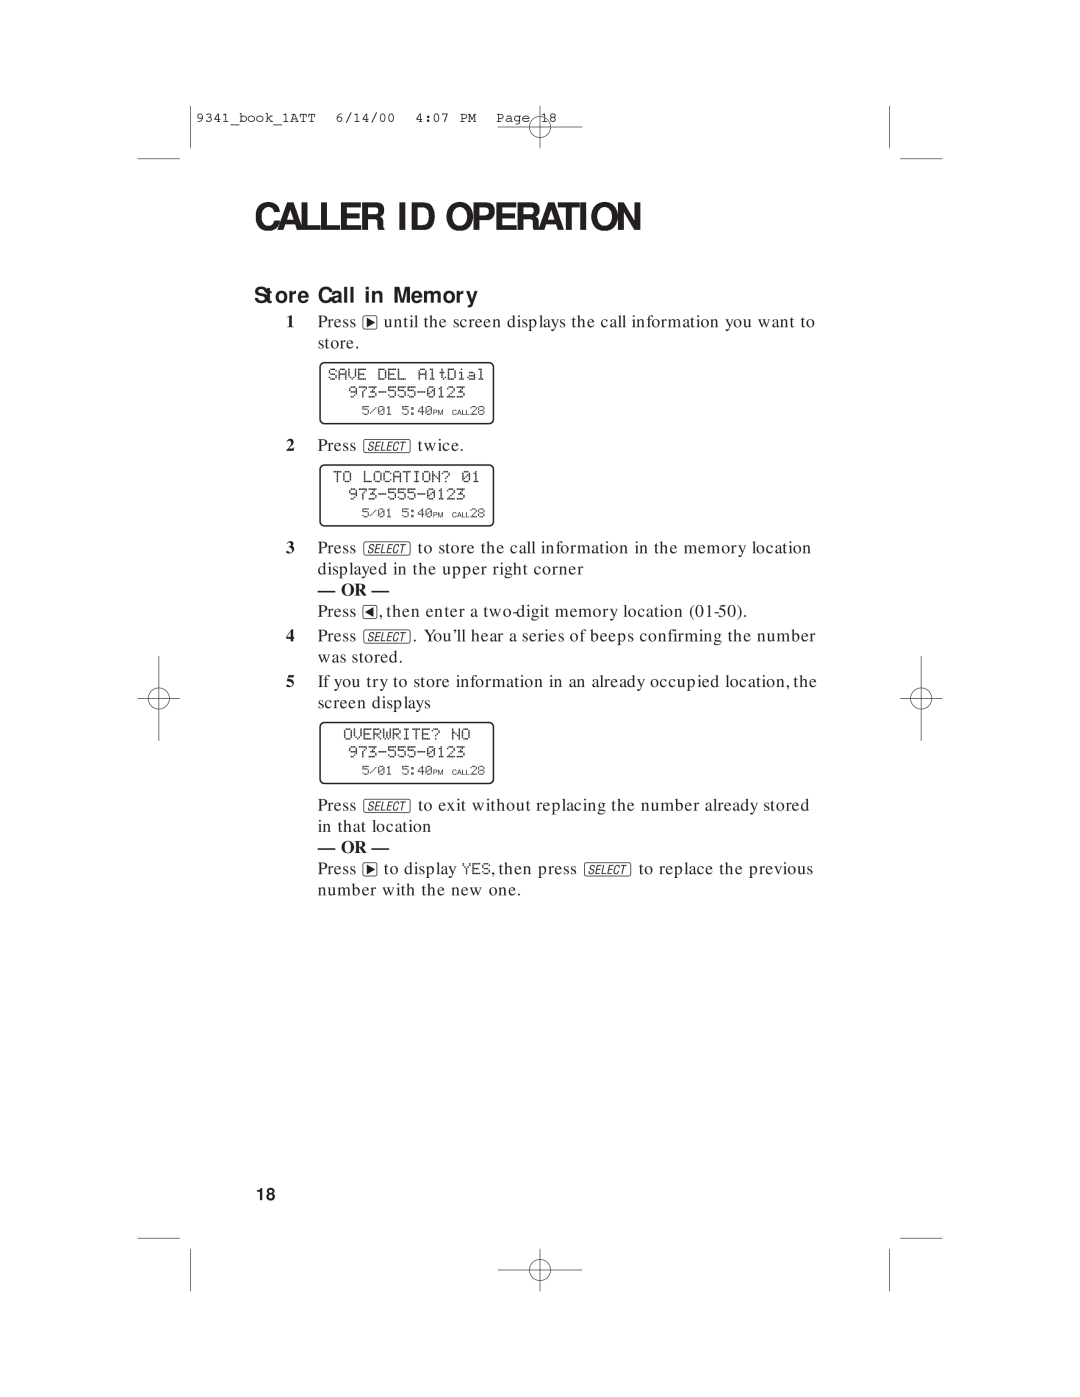 AT&T 9341 user manual Store Call in Memory, Caller Id Operation 